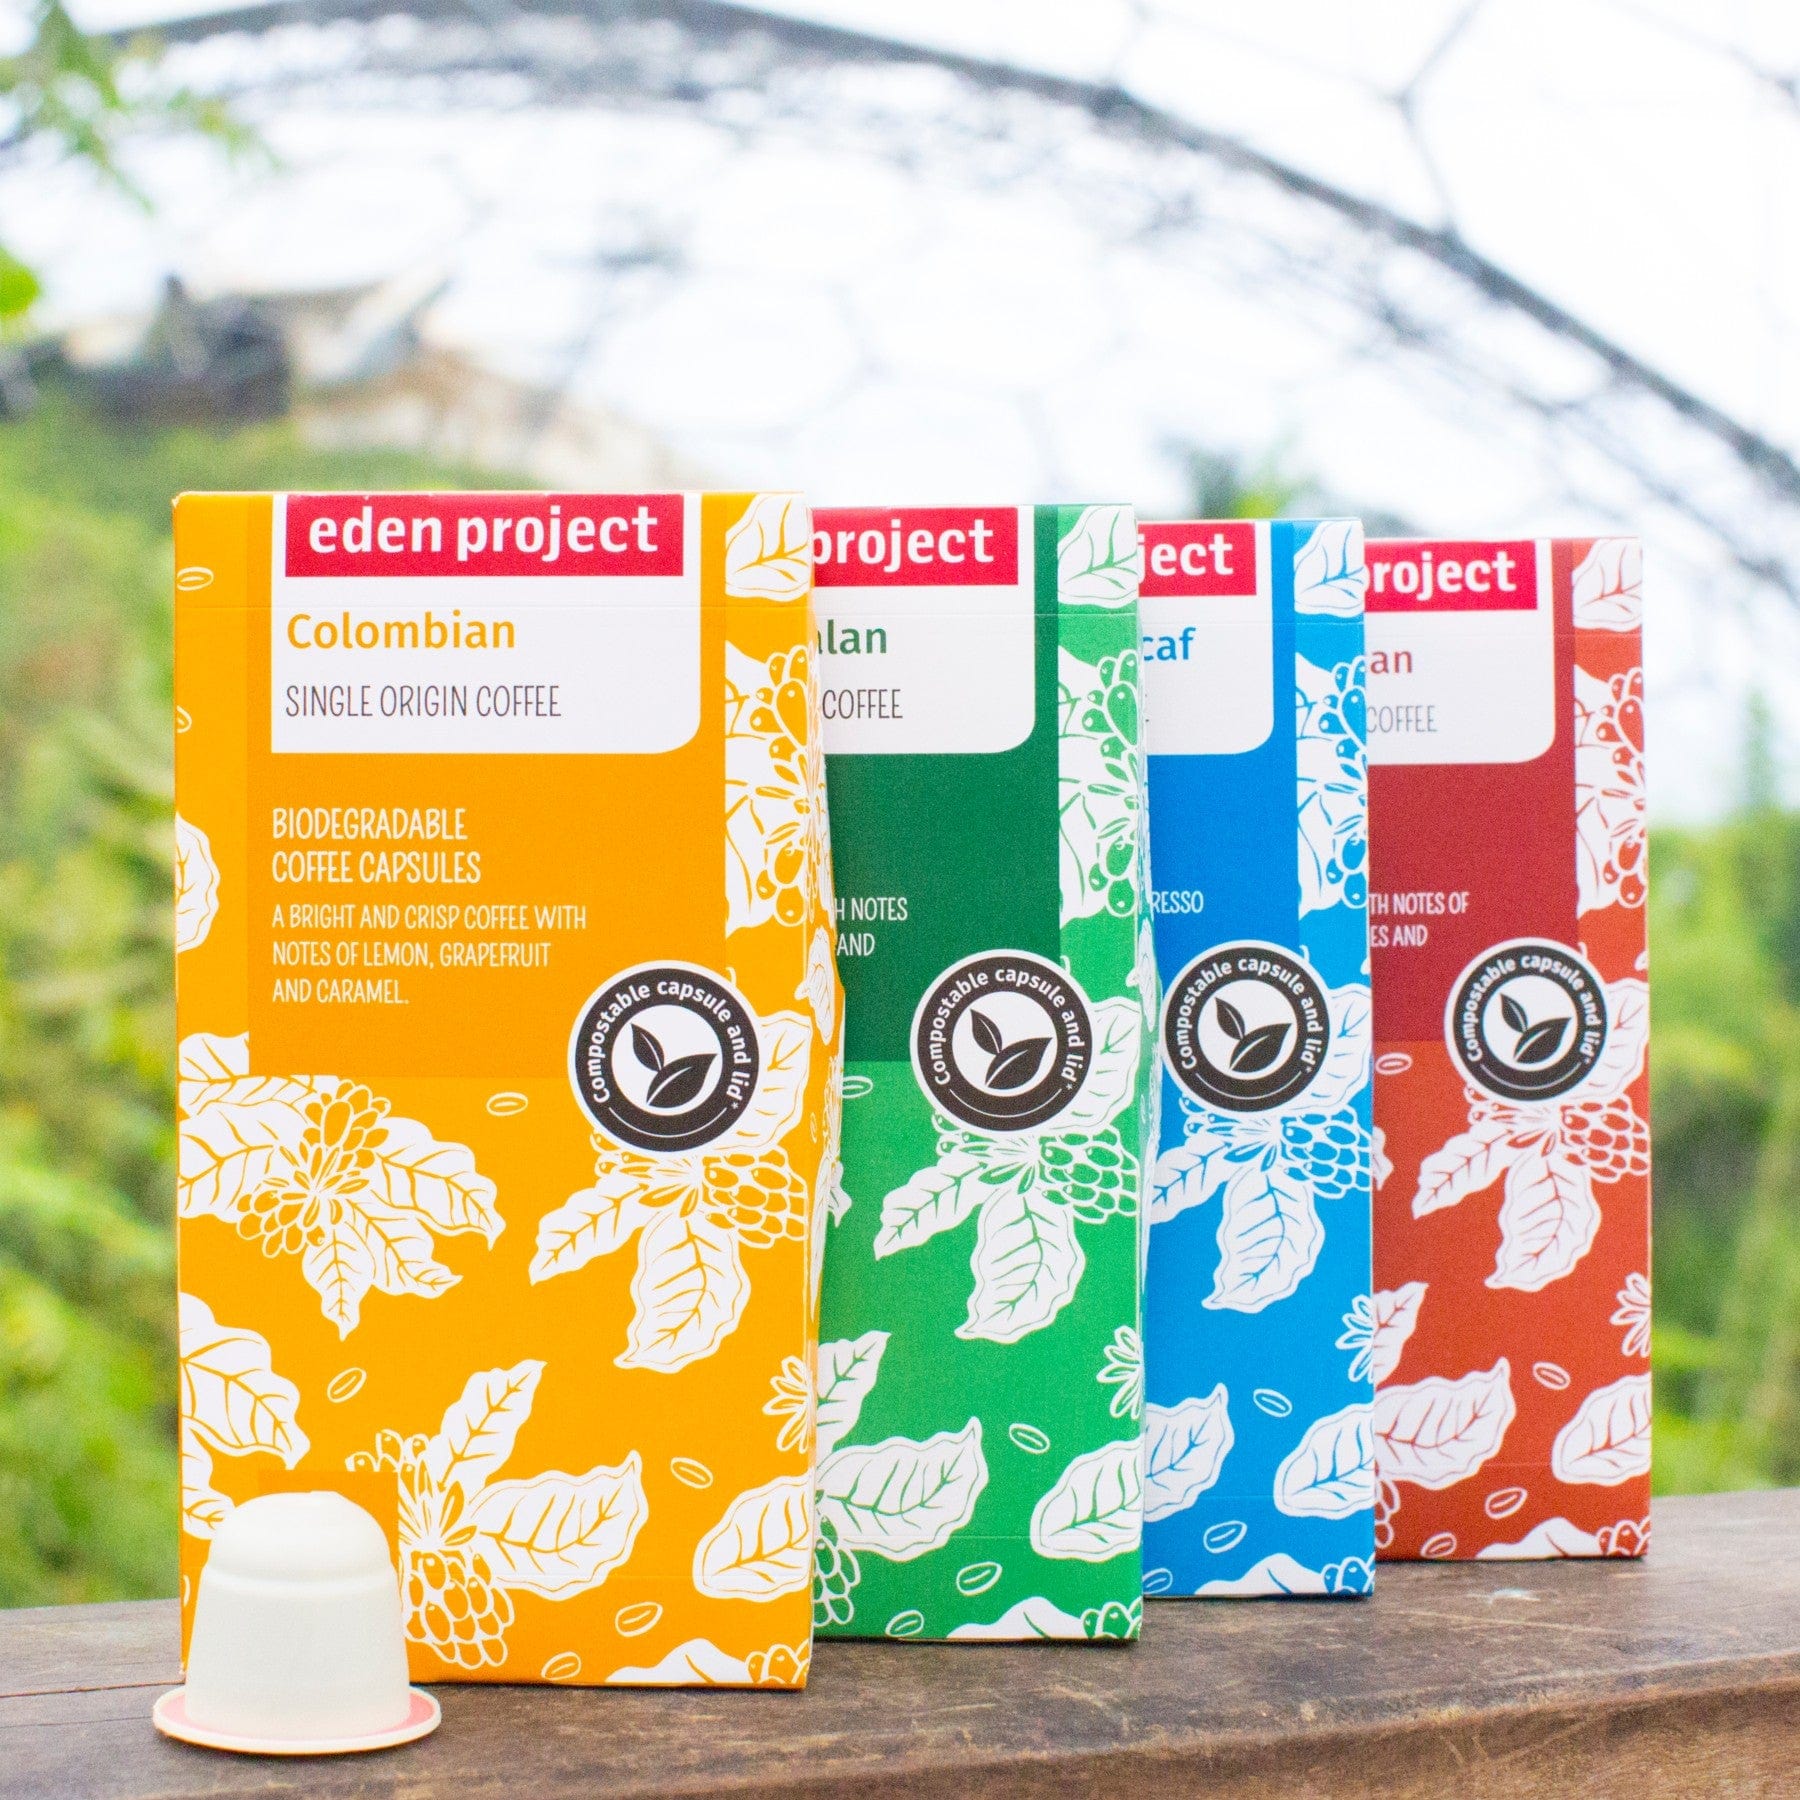 Four colorful Eden Project biodegradable coffee capsules boxes with floral patterns aligned outdoors, featuring Colombian, Italian, and Decaf varieties next to a single espresso capsule.